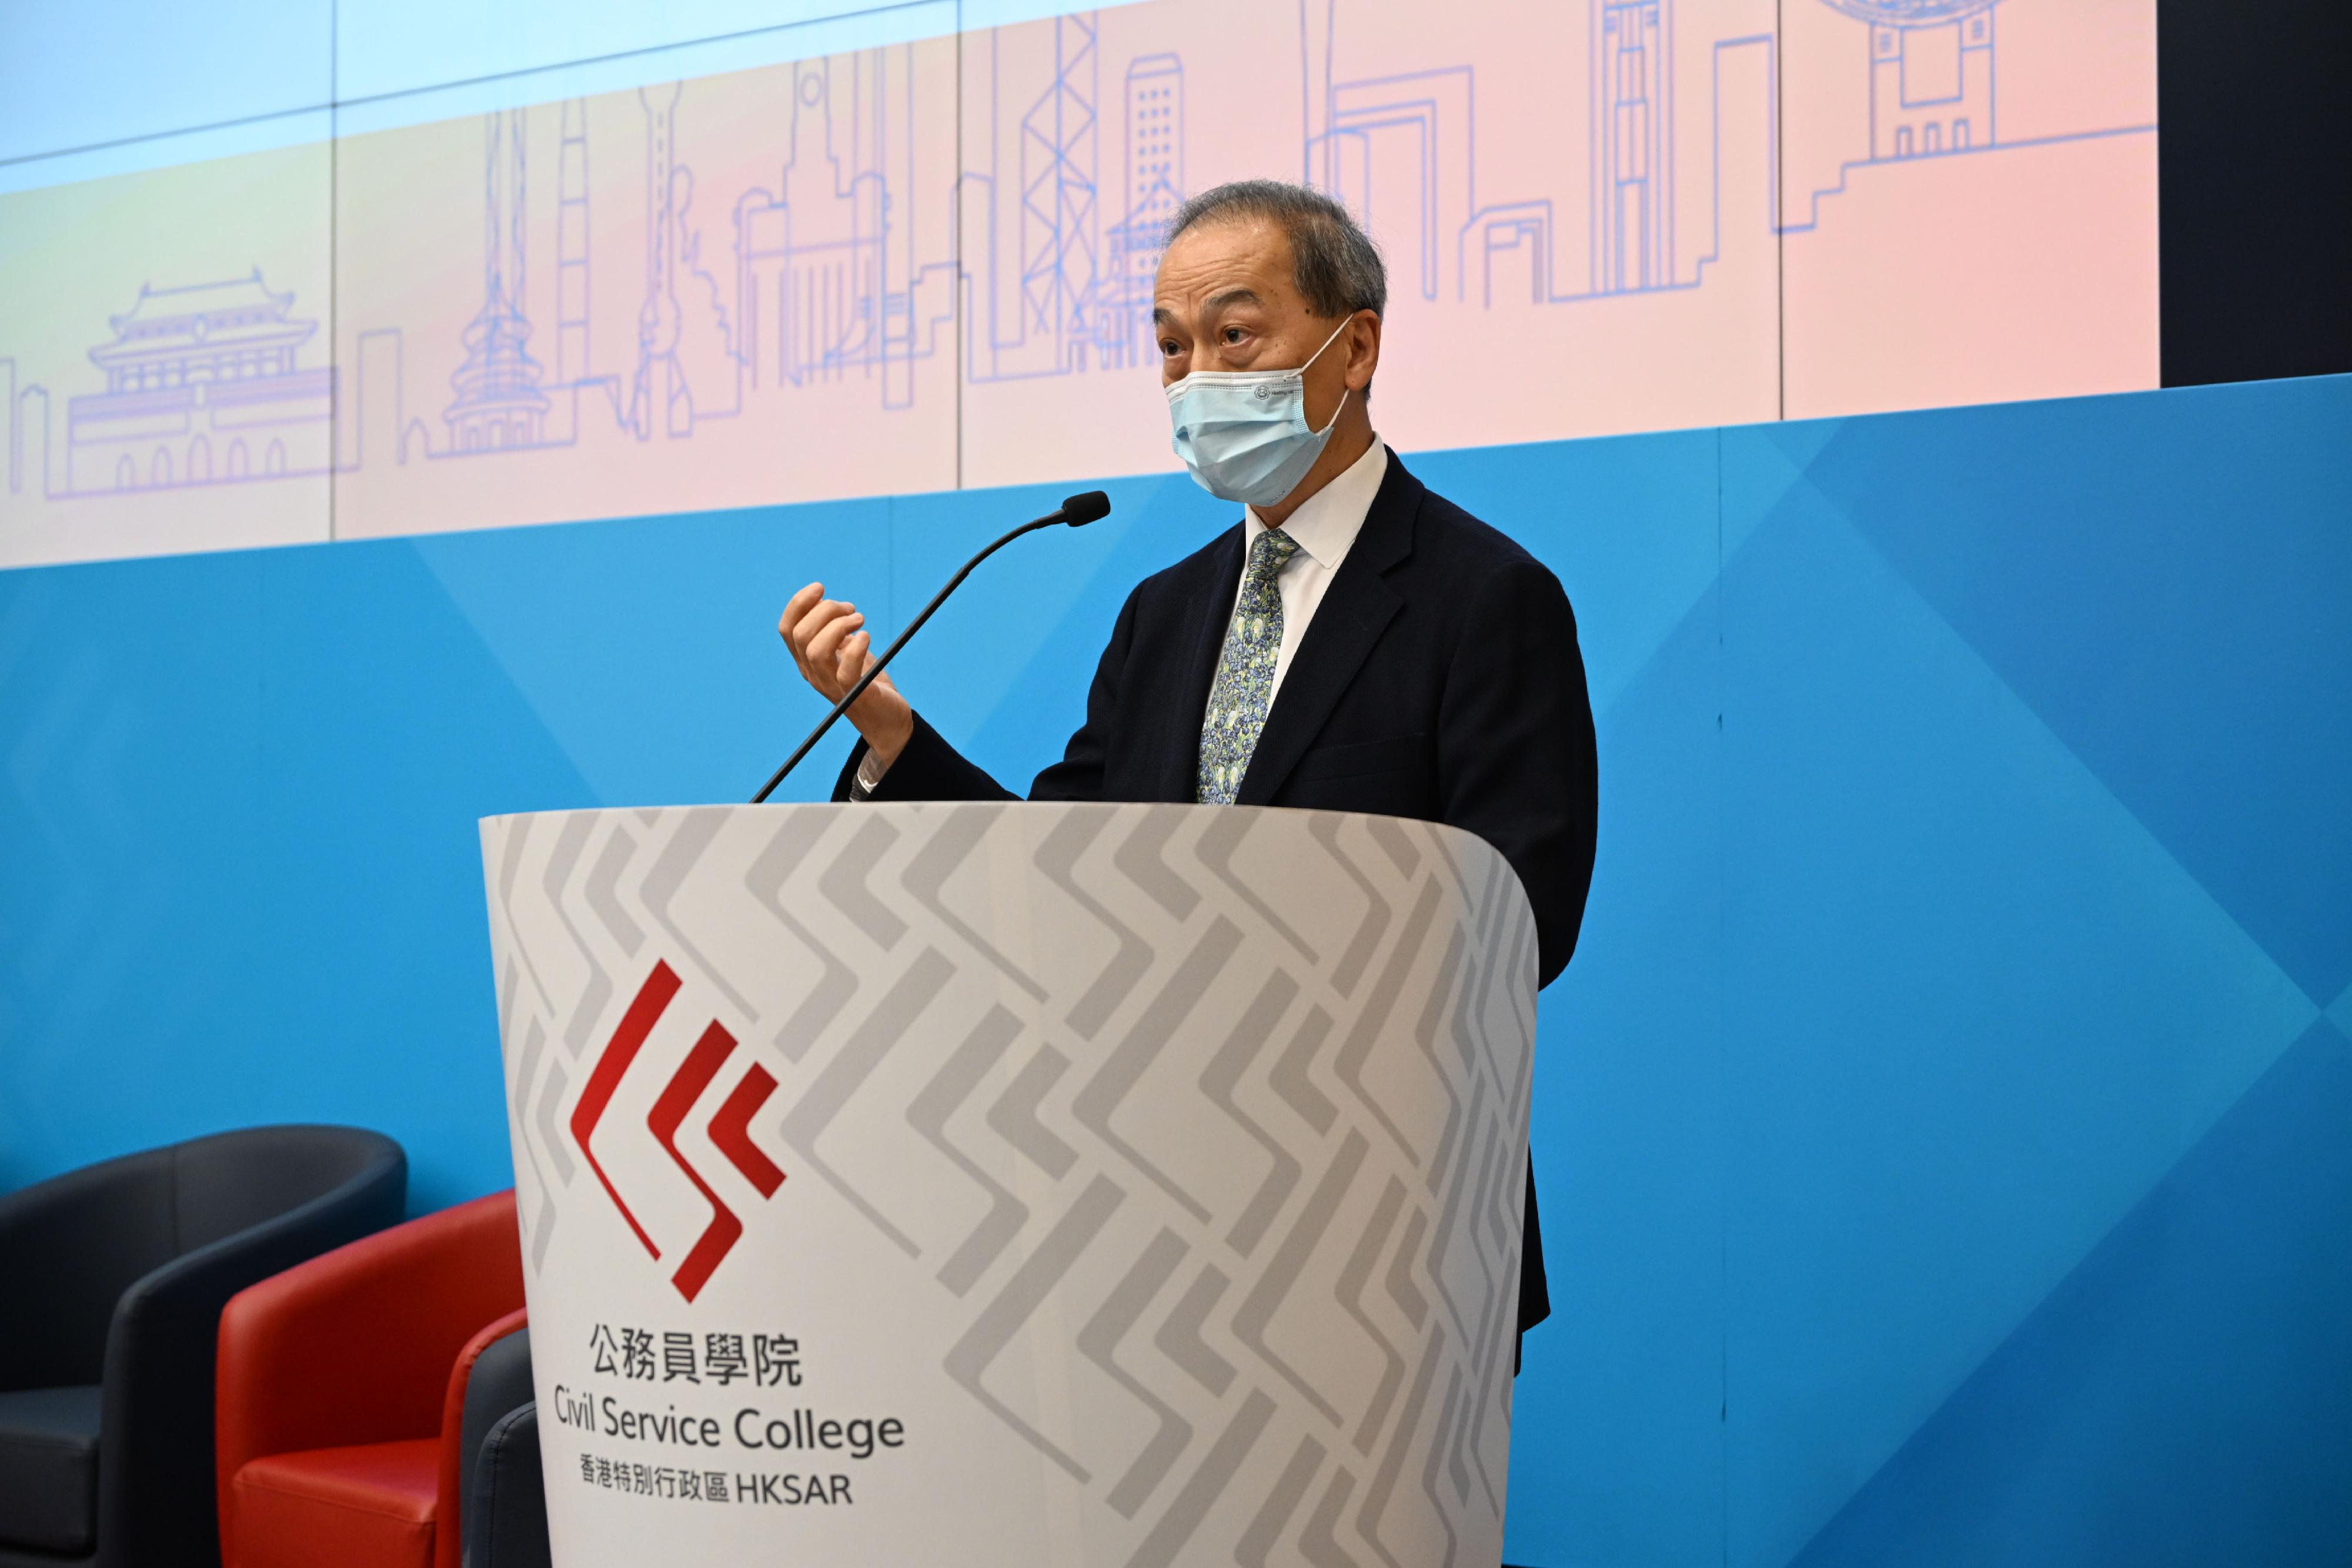 The Civil Service College launched the "25th Anniversary of the Establishment of the HKSAR: Our Way Forward” seminar series, and held today (July 11) the first seminar with the topic of “Towards Net Zero: Coalition for a Resilient Future” in collaboration with the Hong Kong Academy of Finance. Photo shows the Chief Executive Officer of the Hong Kong Academy of Finance, Mr Kwok Kwok-chuen, sharing an overview of Hong Kong’s transition to net zero emission.